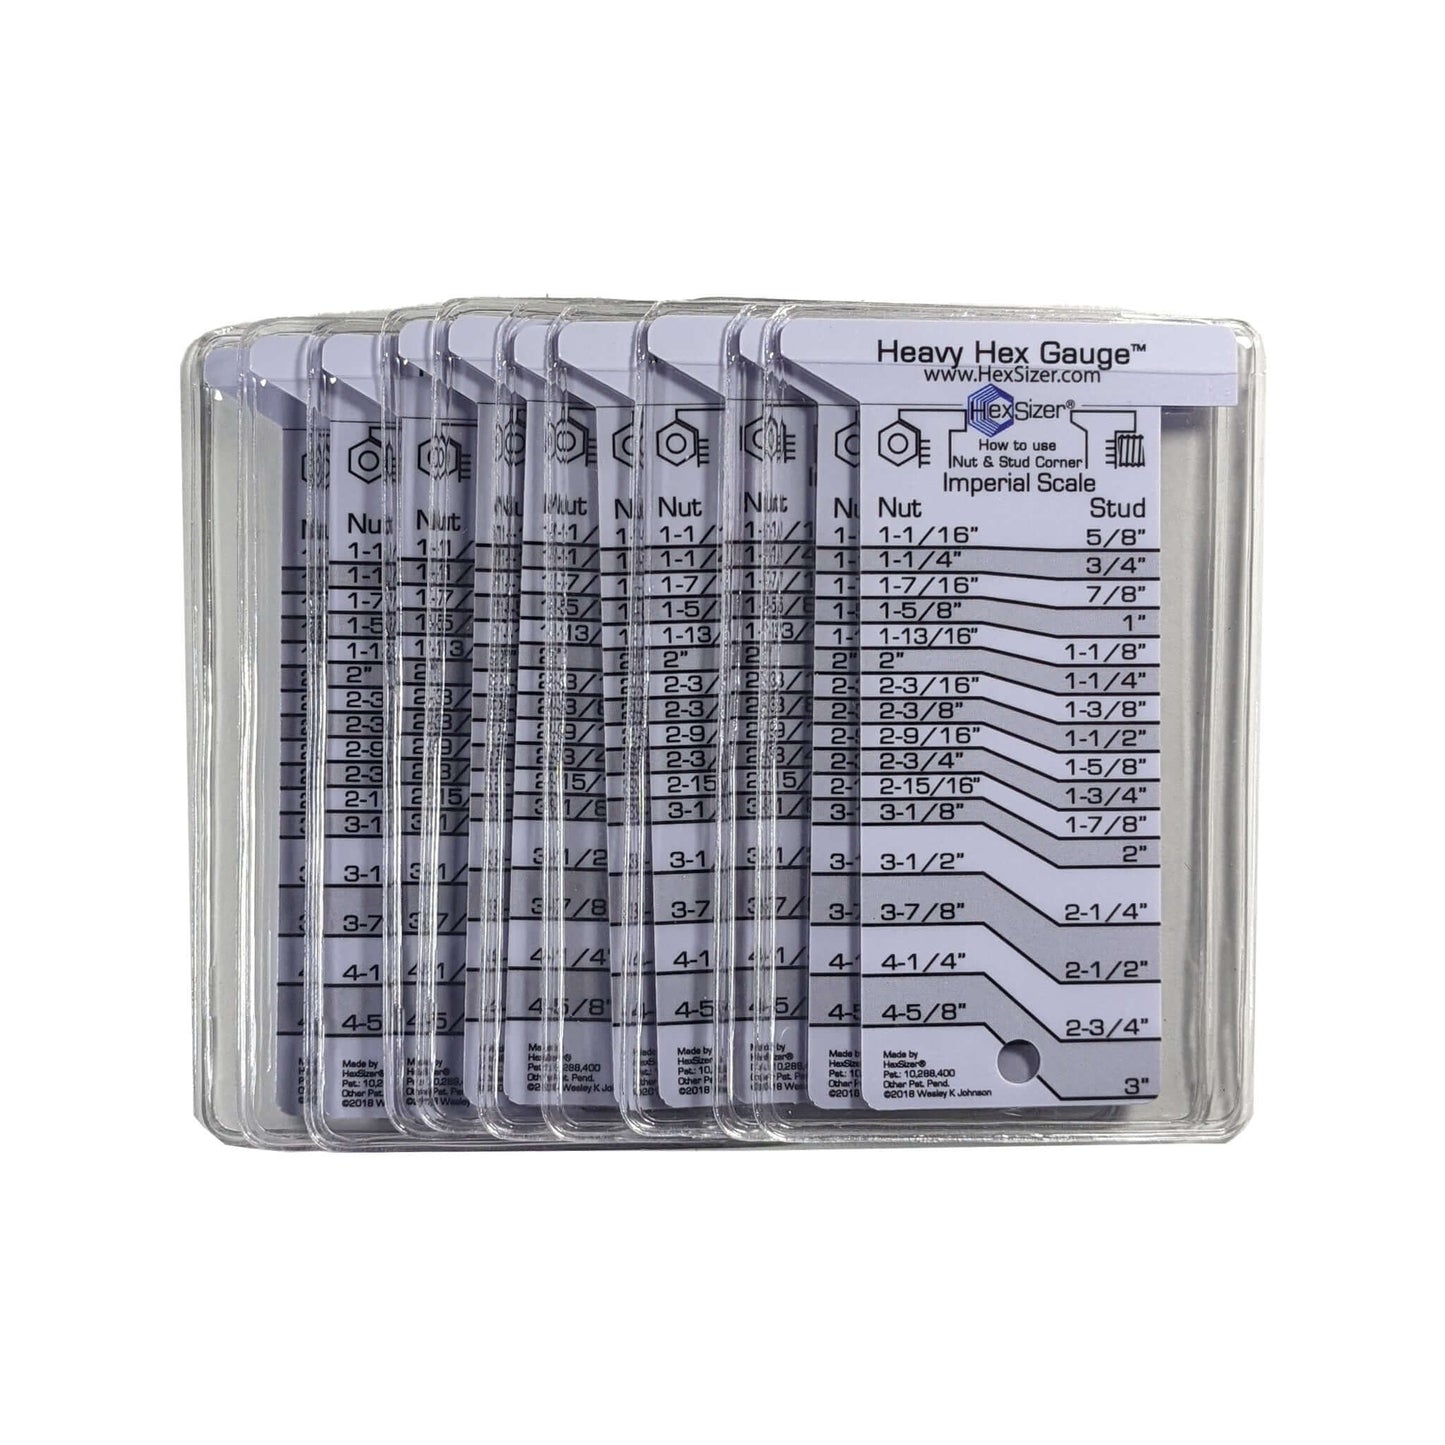 10 Pack with sleeves - Gray on White - Plastic Heavy Hex Gauge Inch & Metric